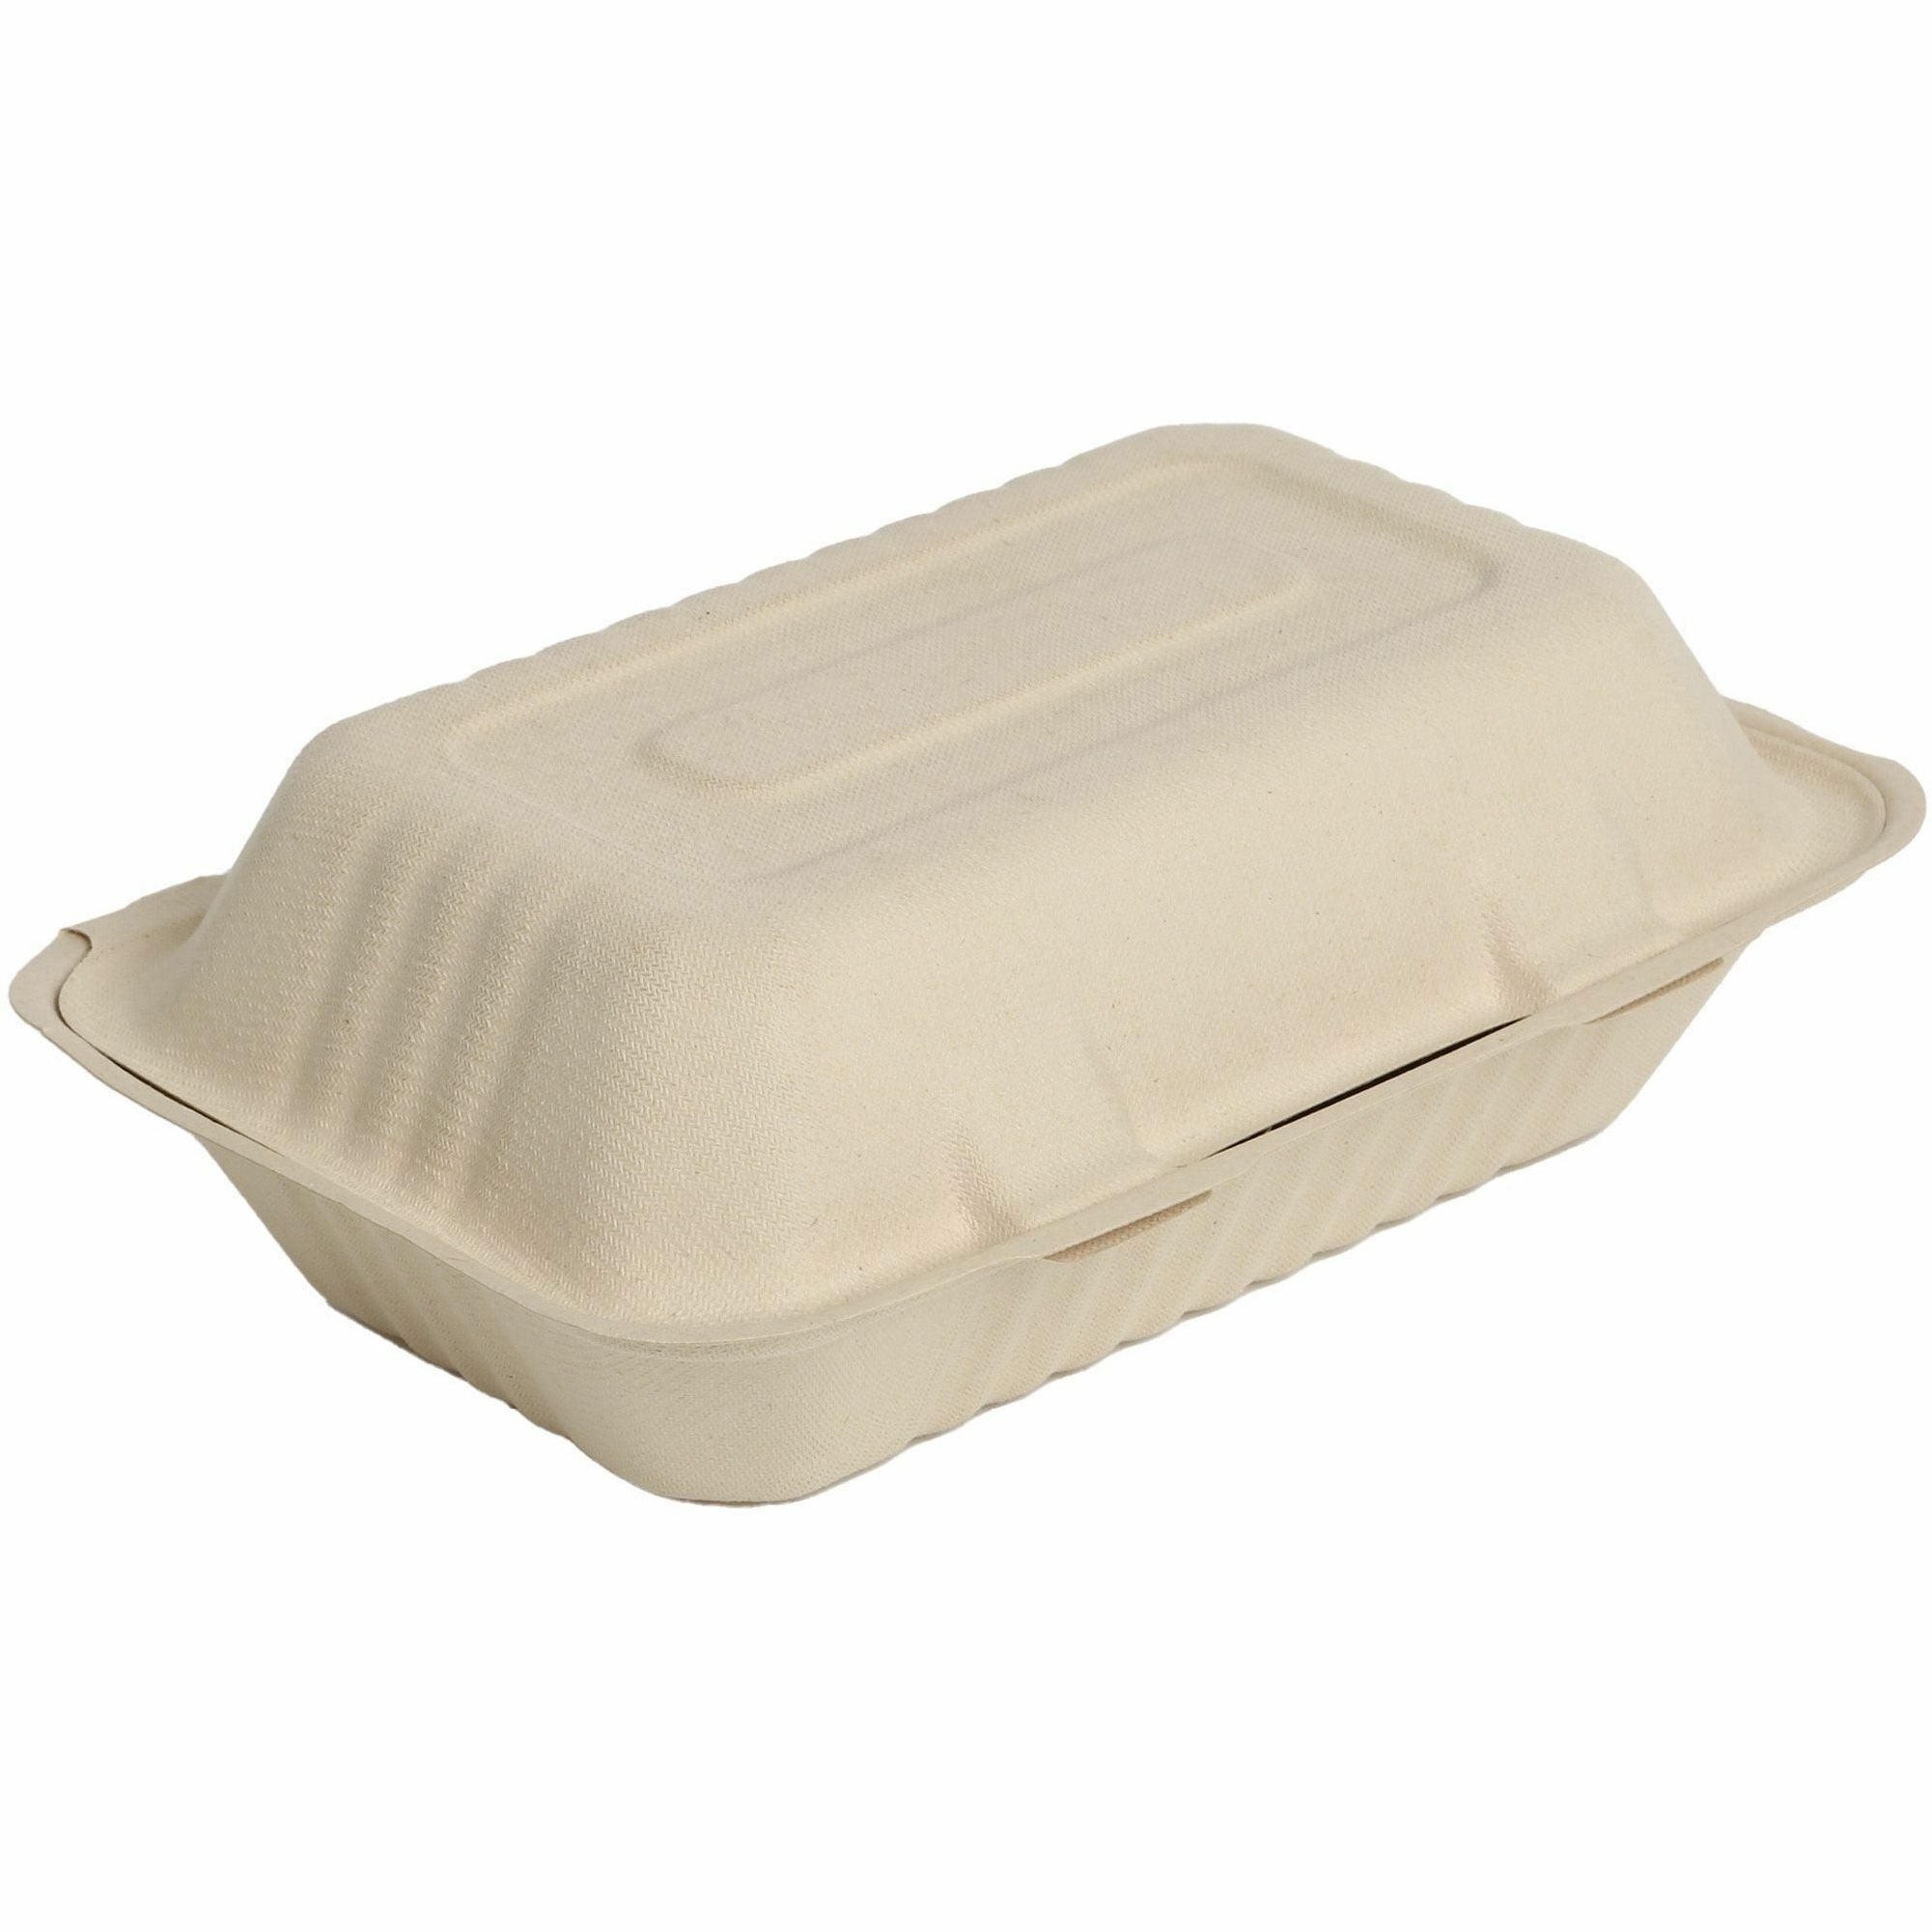 BluTable 27 oz Portable Clamshell Containers - Food - Natural - Molded Fiber, Sugarcane Fiber Body - 250 / Carton - 2